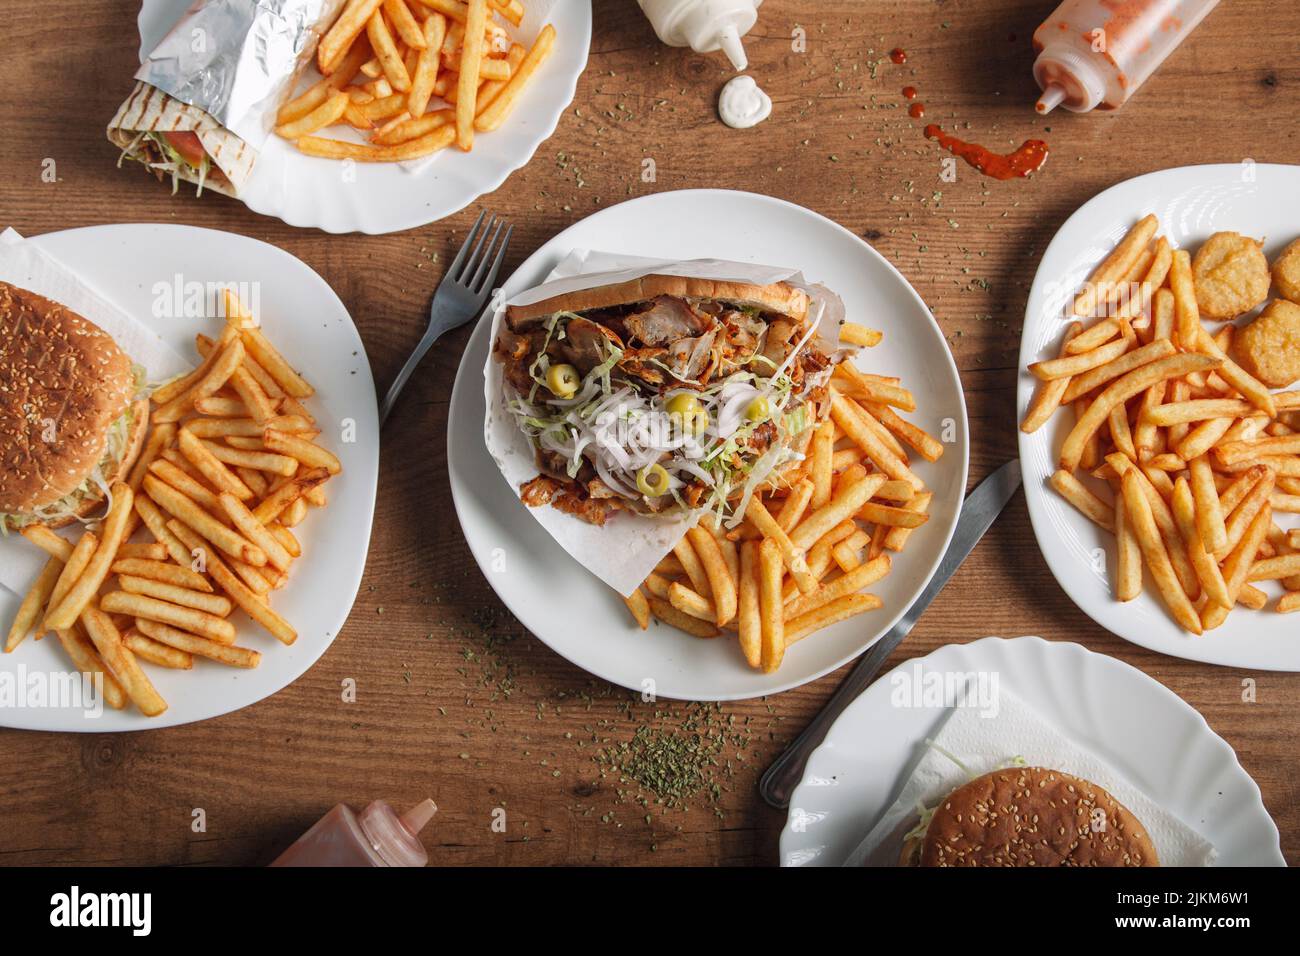 Various fast food dishes. Pita, burgers and nuggets. Stock Photo